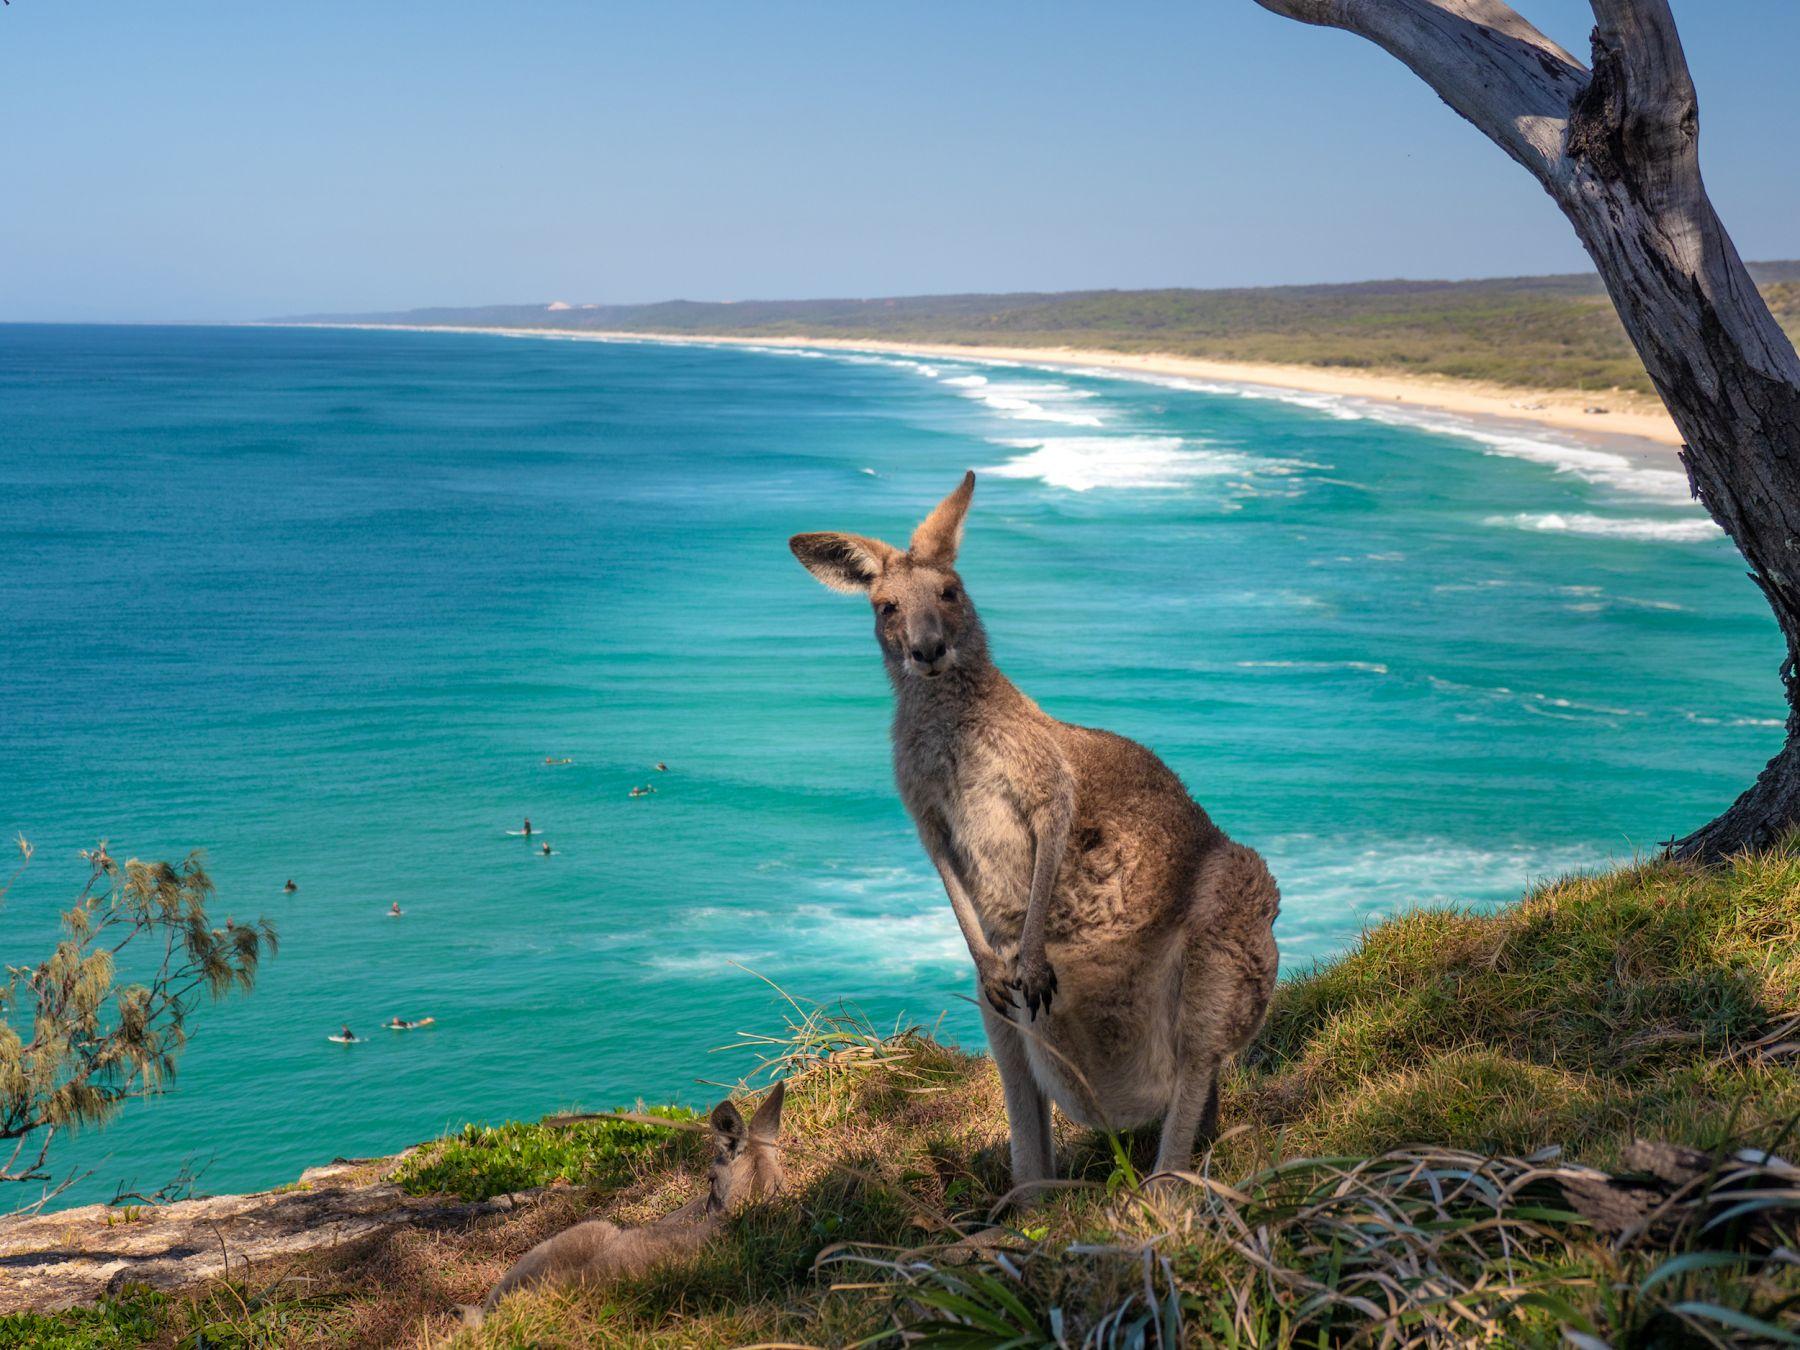 Queensland: wild and sustainable